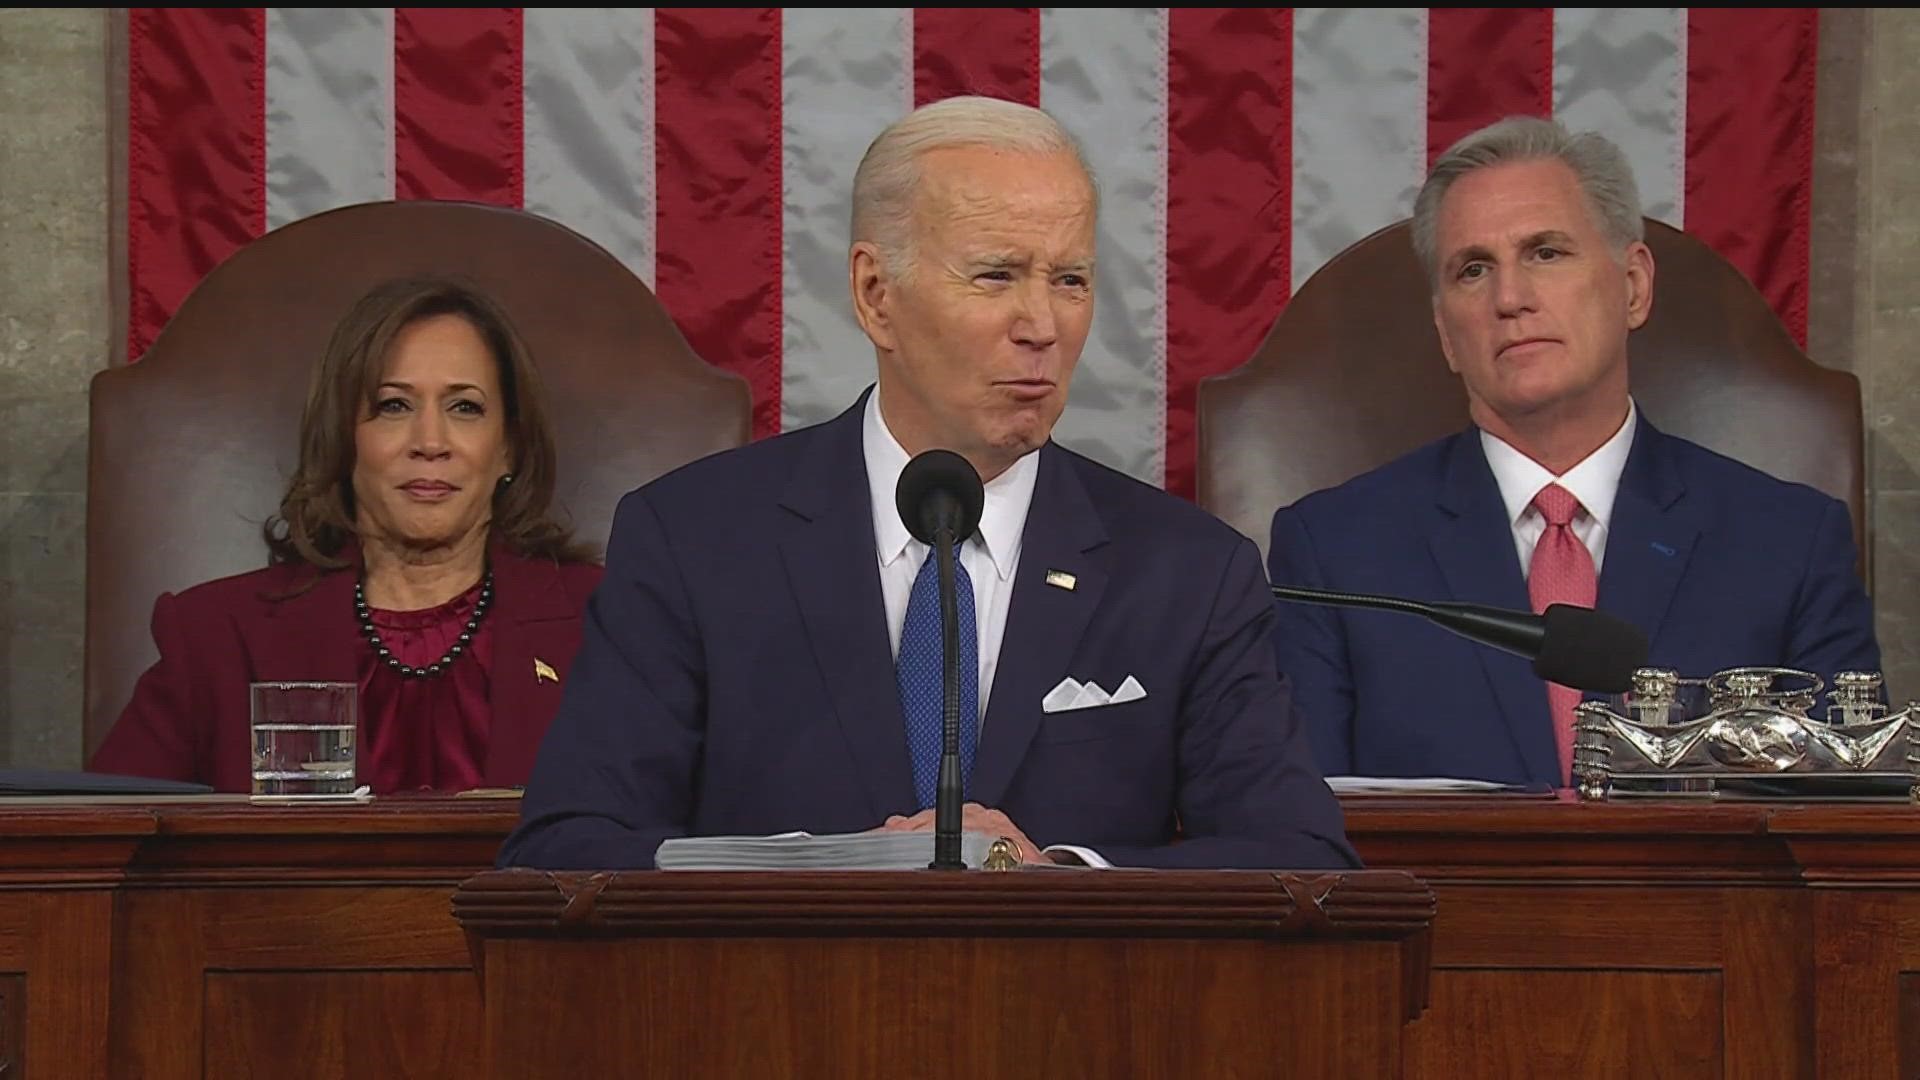 It was Biden's 'first' speech to a joint session of Congress since Republicans took control of the house.